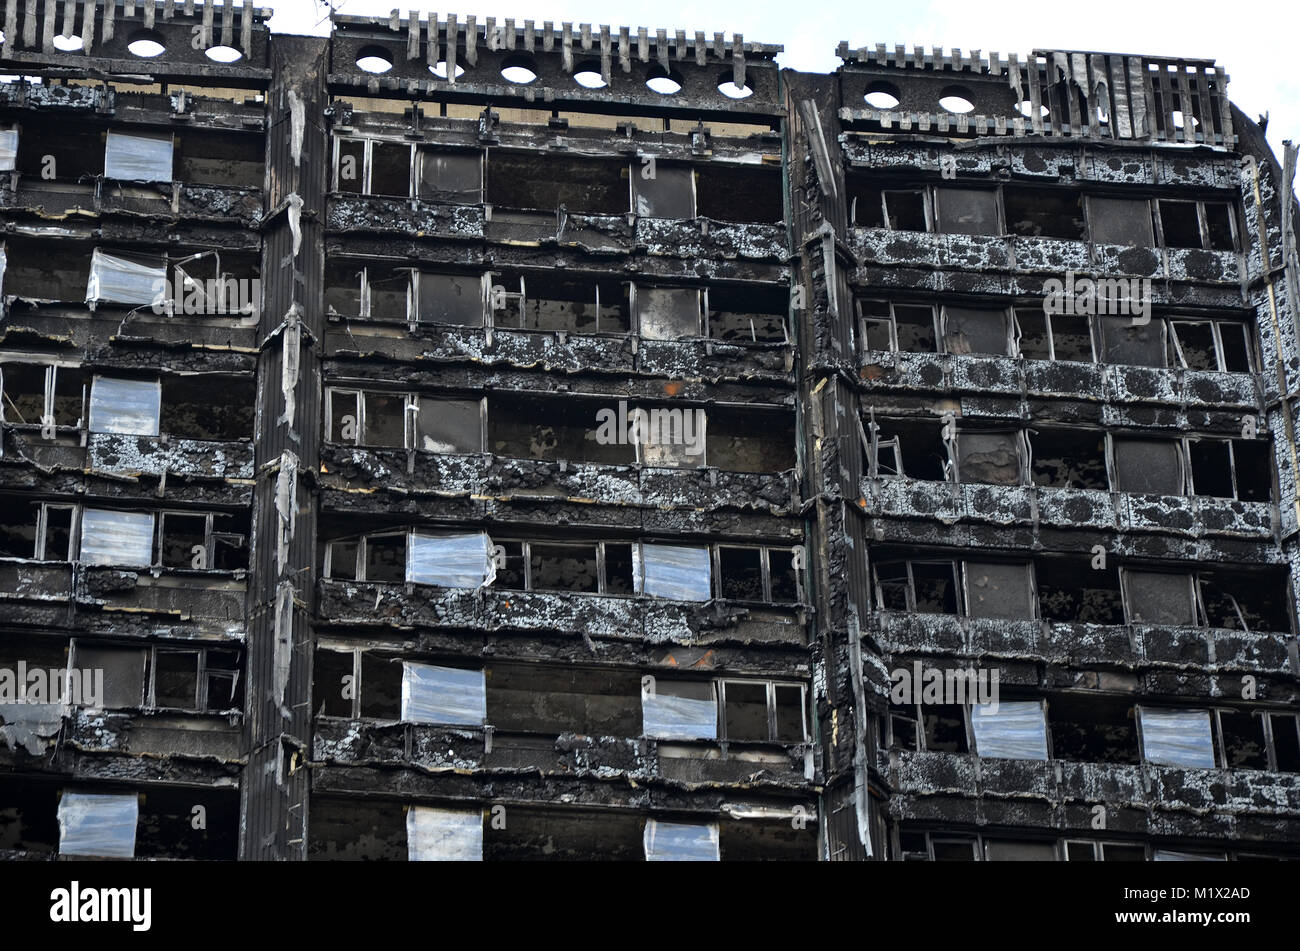 Grenfell Tower, fire, disaster, London, fire damage, High rise flats Stock Photo